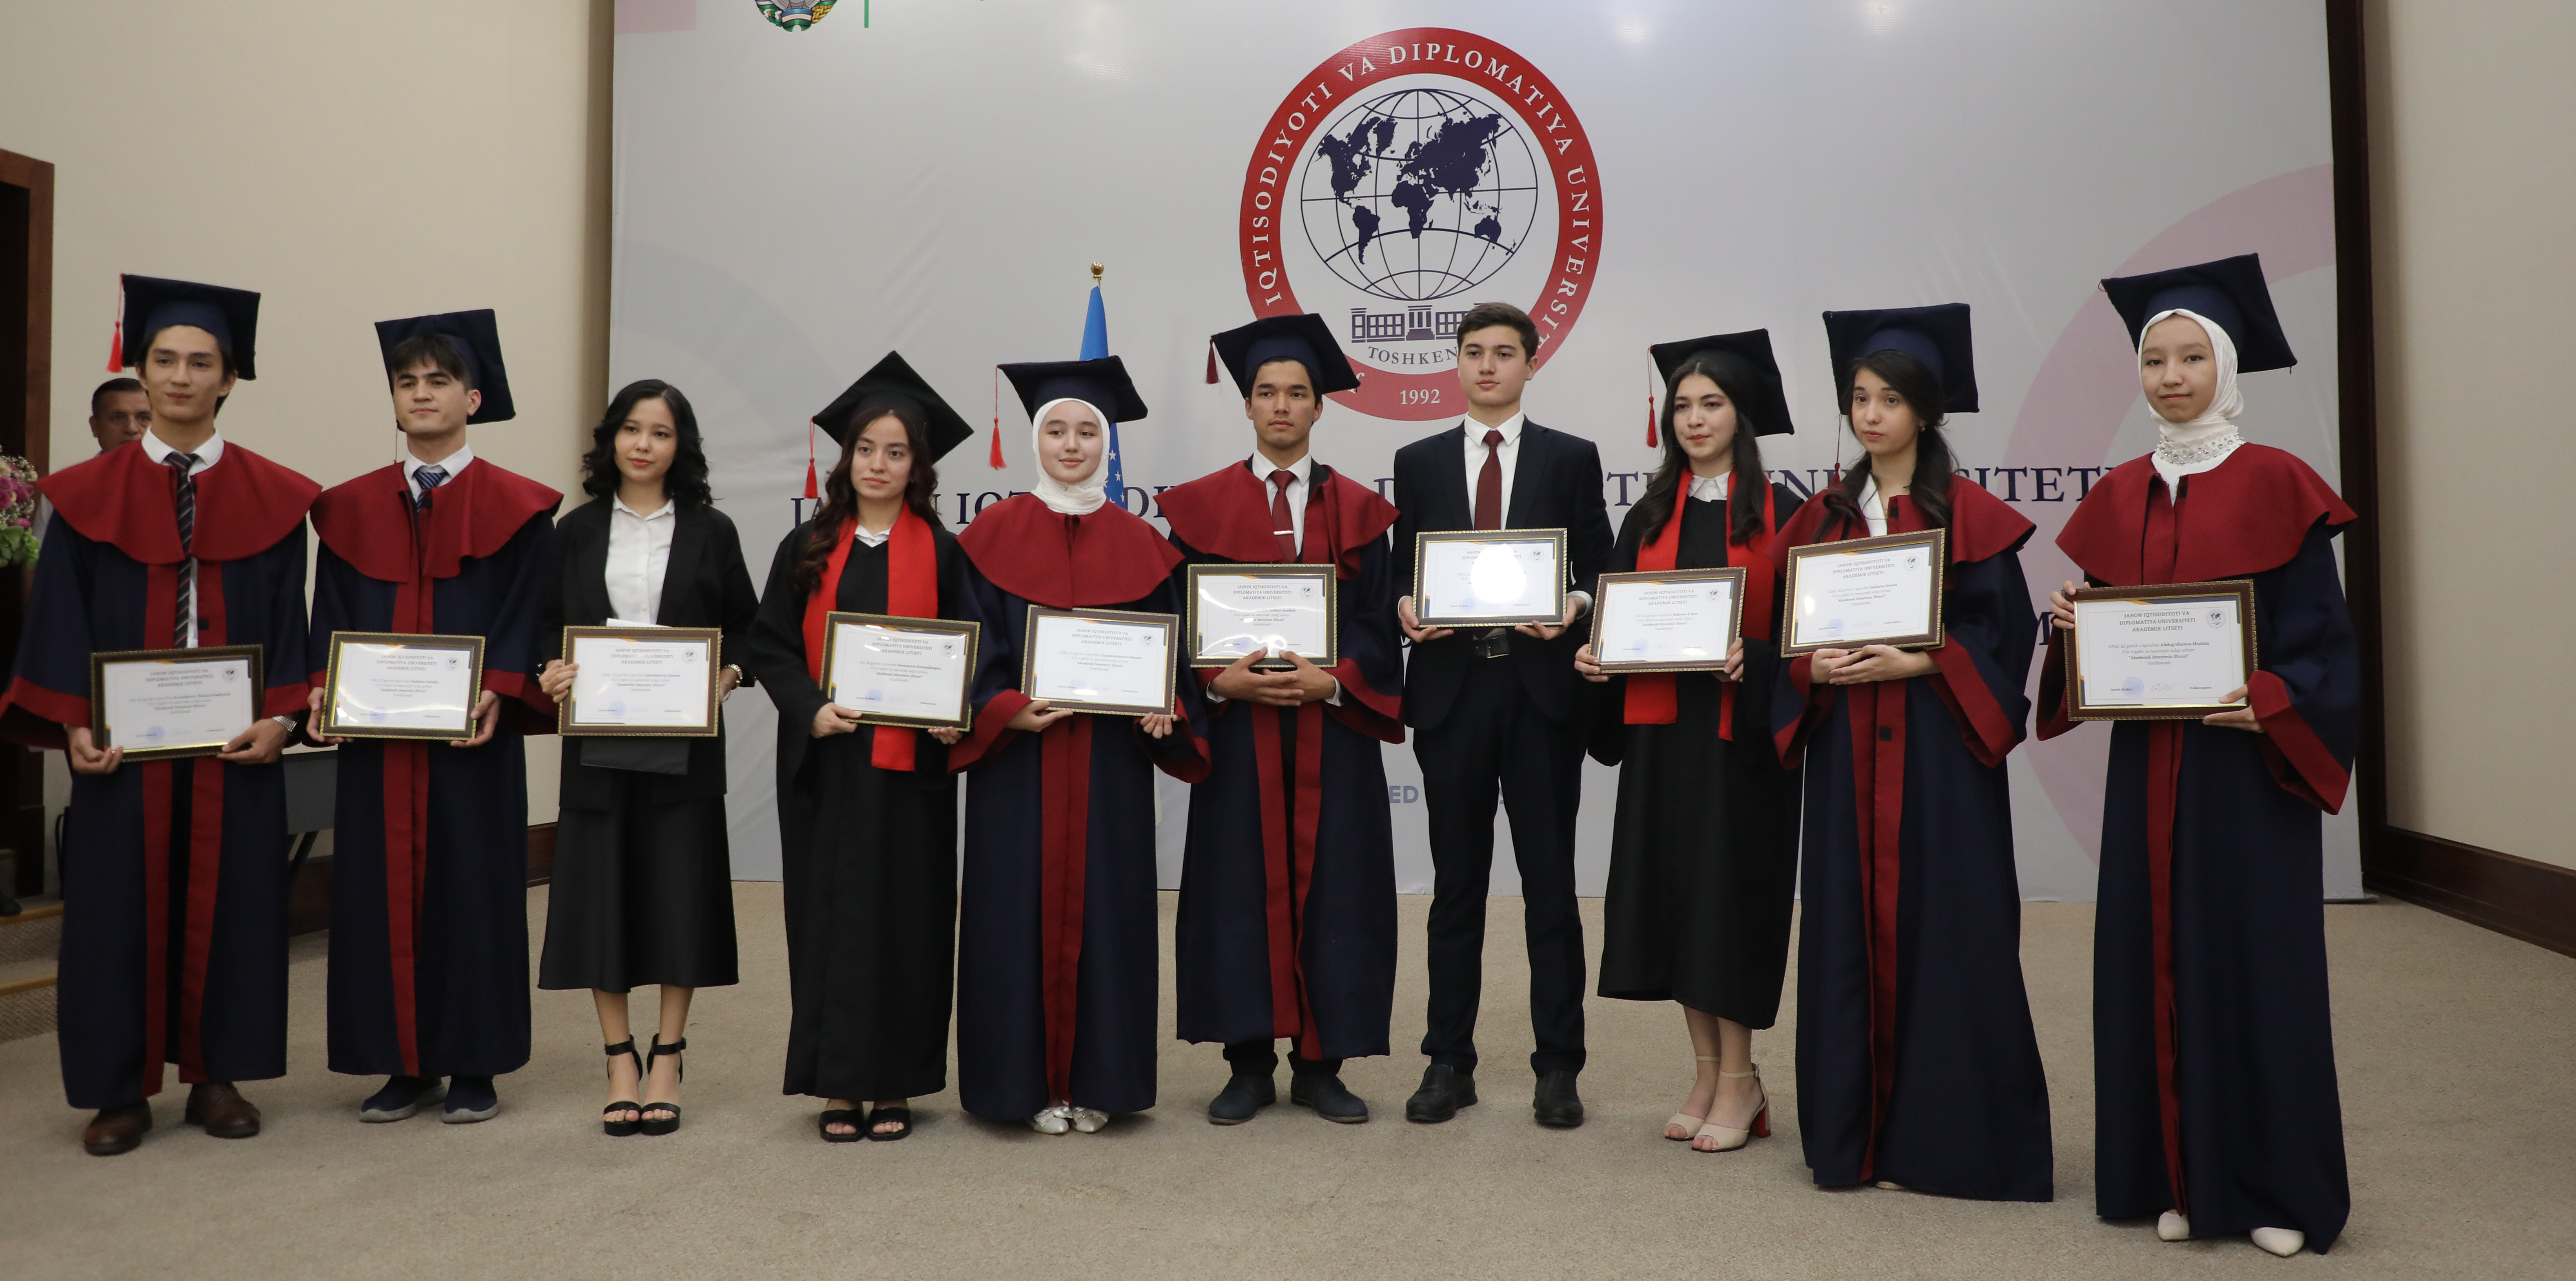 A medal award ceremony for the graduates of UWED Academic Lyceum was held at the University of world economy and diplomacy